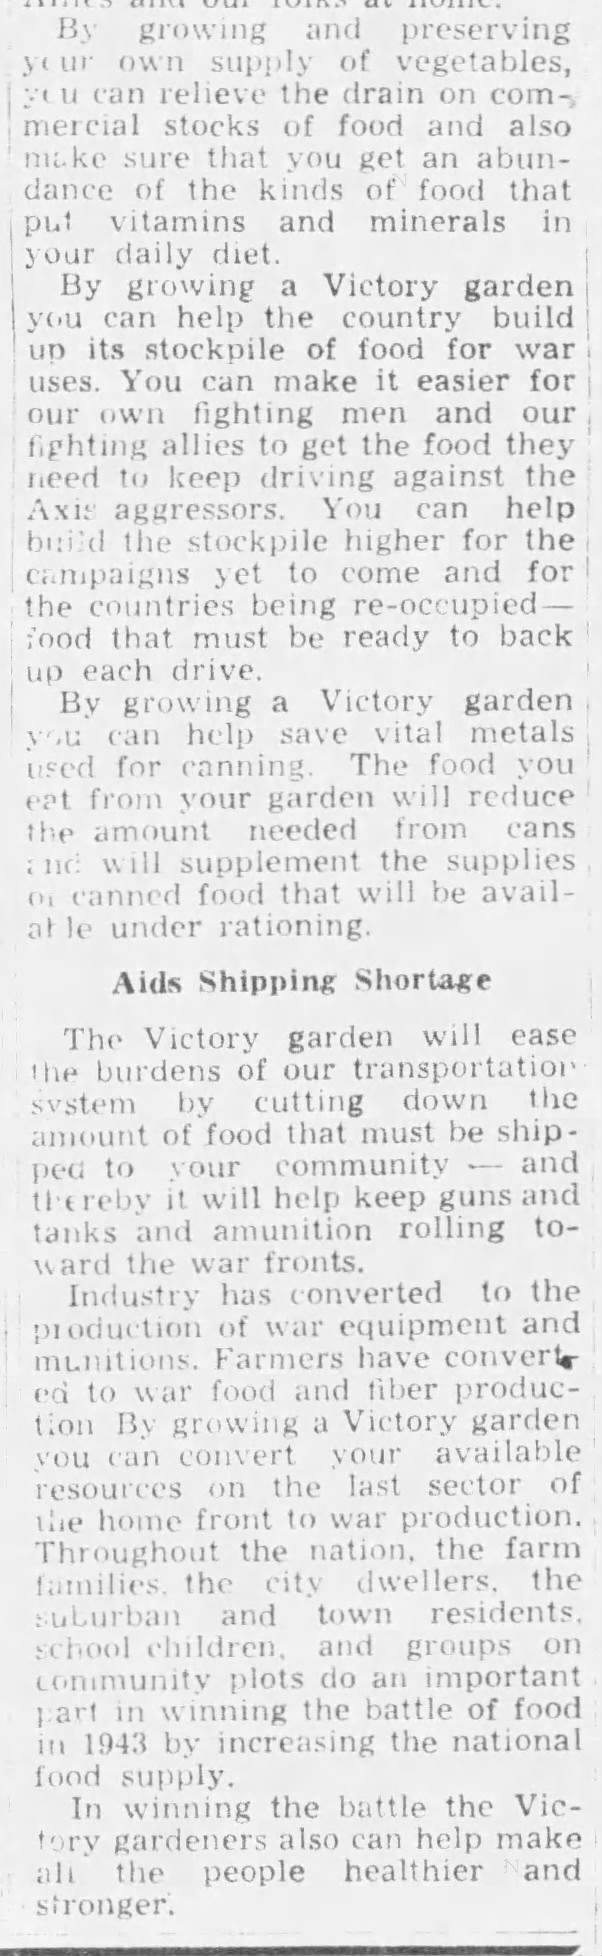 Patriotic appeal to grow victory gardens, 1943